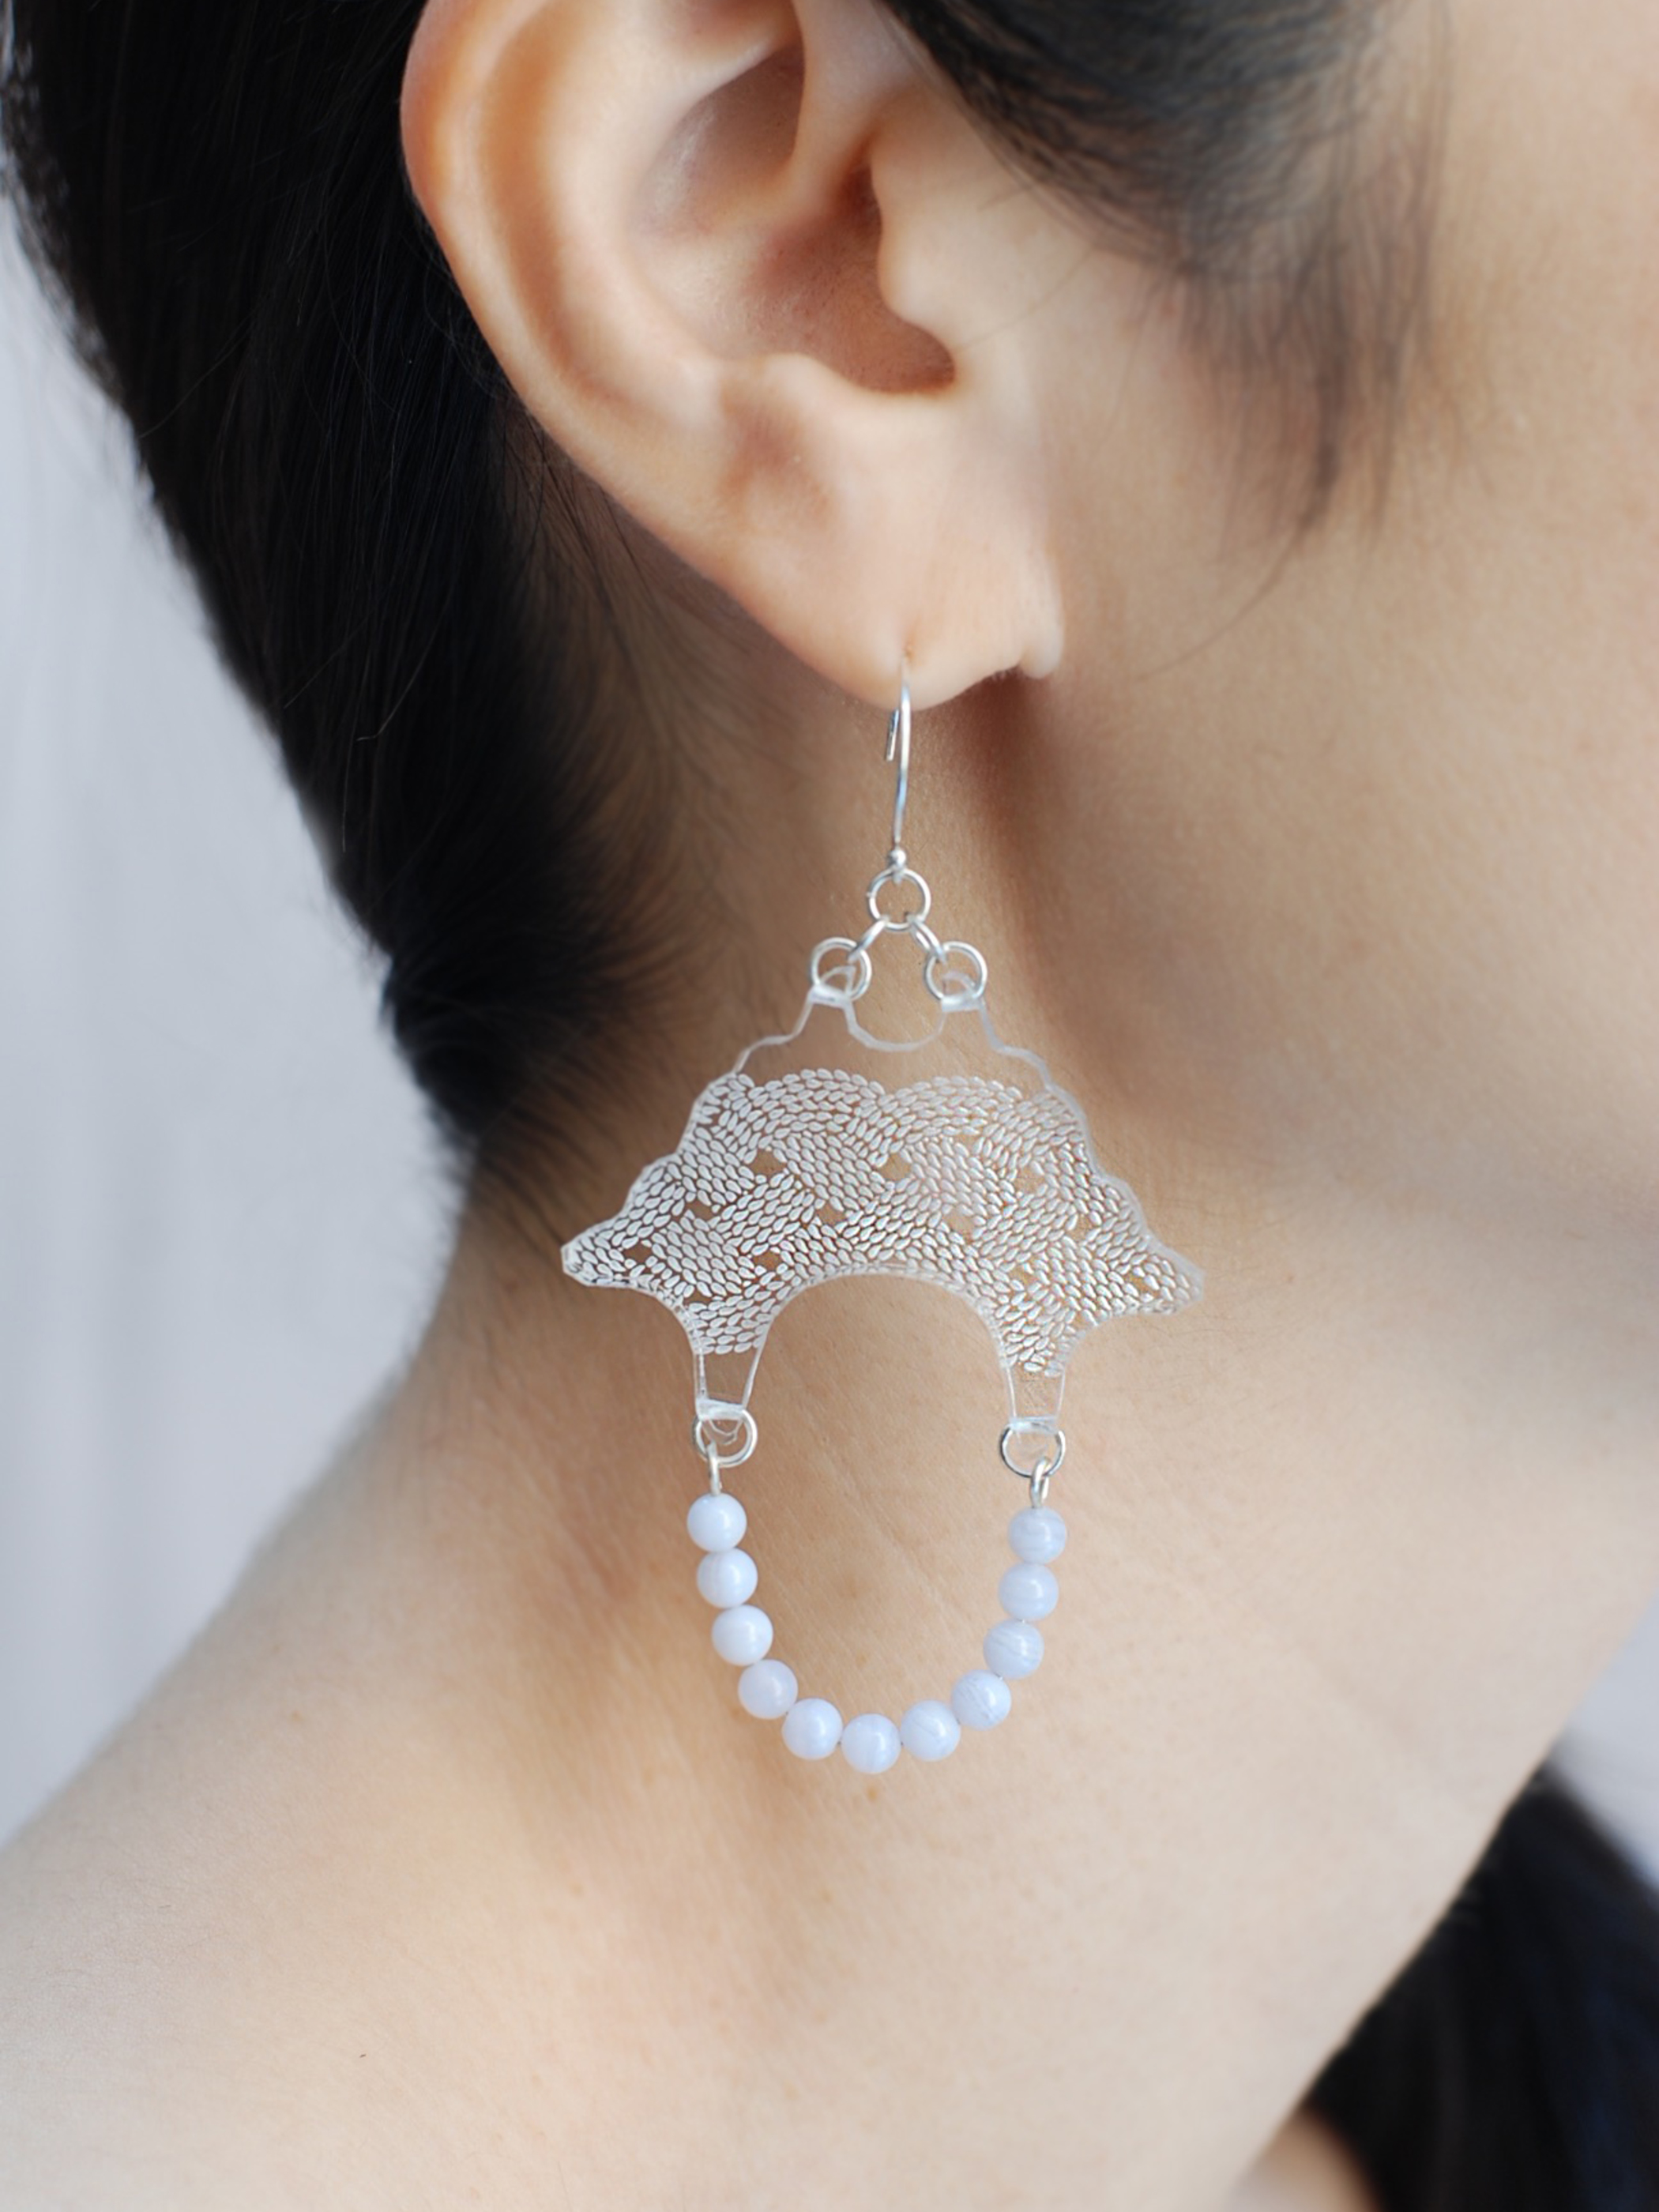 Melted Spin Pierce 05(Blue lace agate / Rock Crystal)